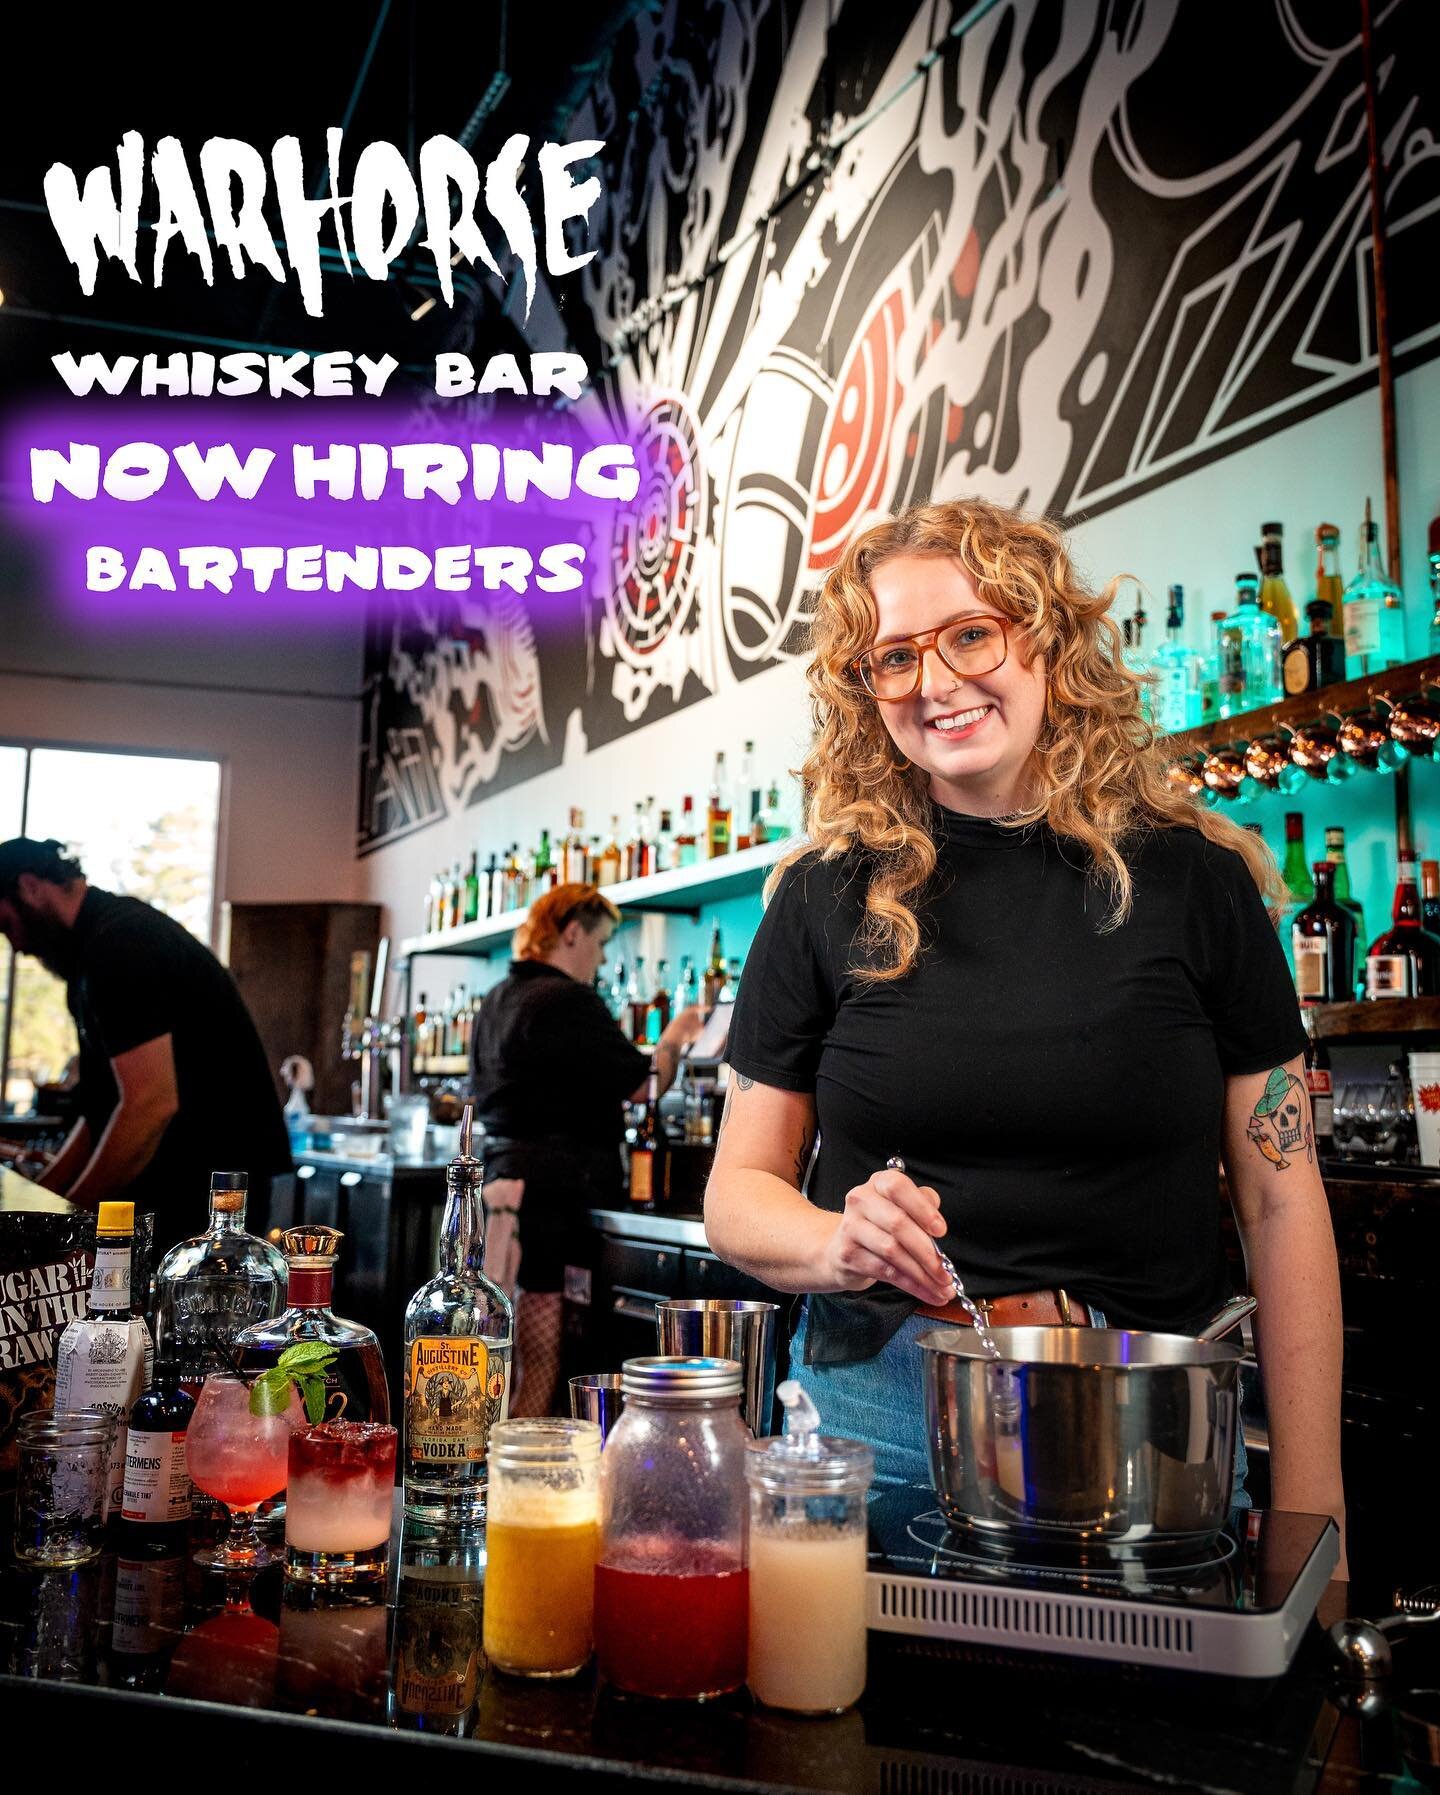 We are looking for experienced Bartenders at both Warhorse locations and our sister bar, @battleponytlh!

The Bartender position requires 2 years of bartending experience with at least 1 year in a craft cocktail environment. Full-time and part-time p